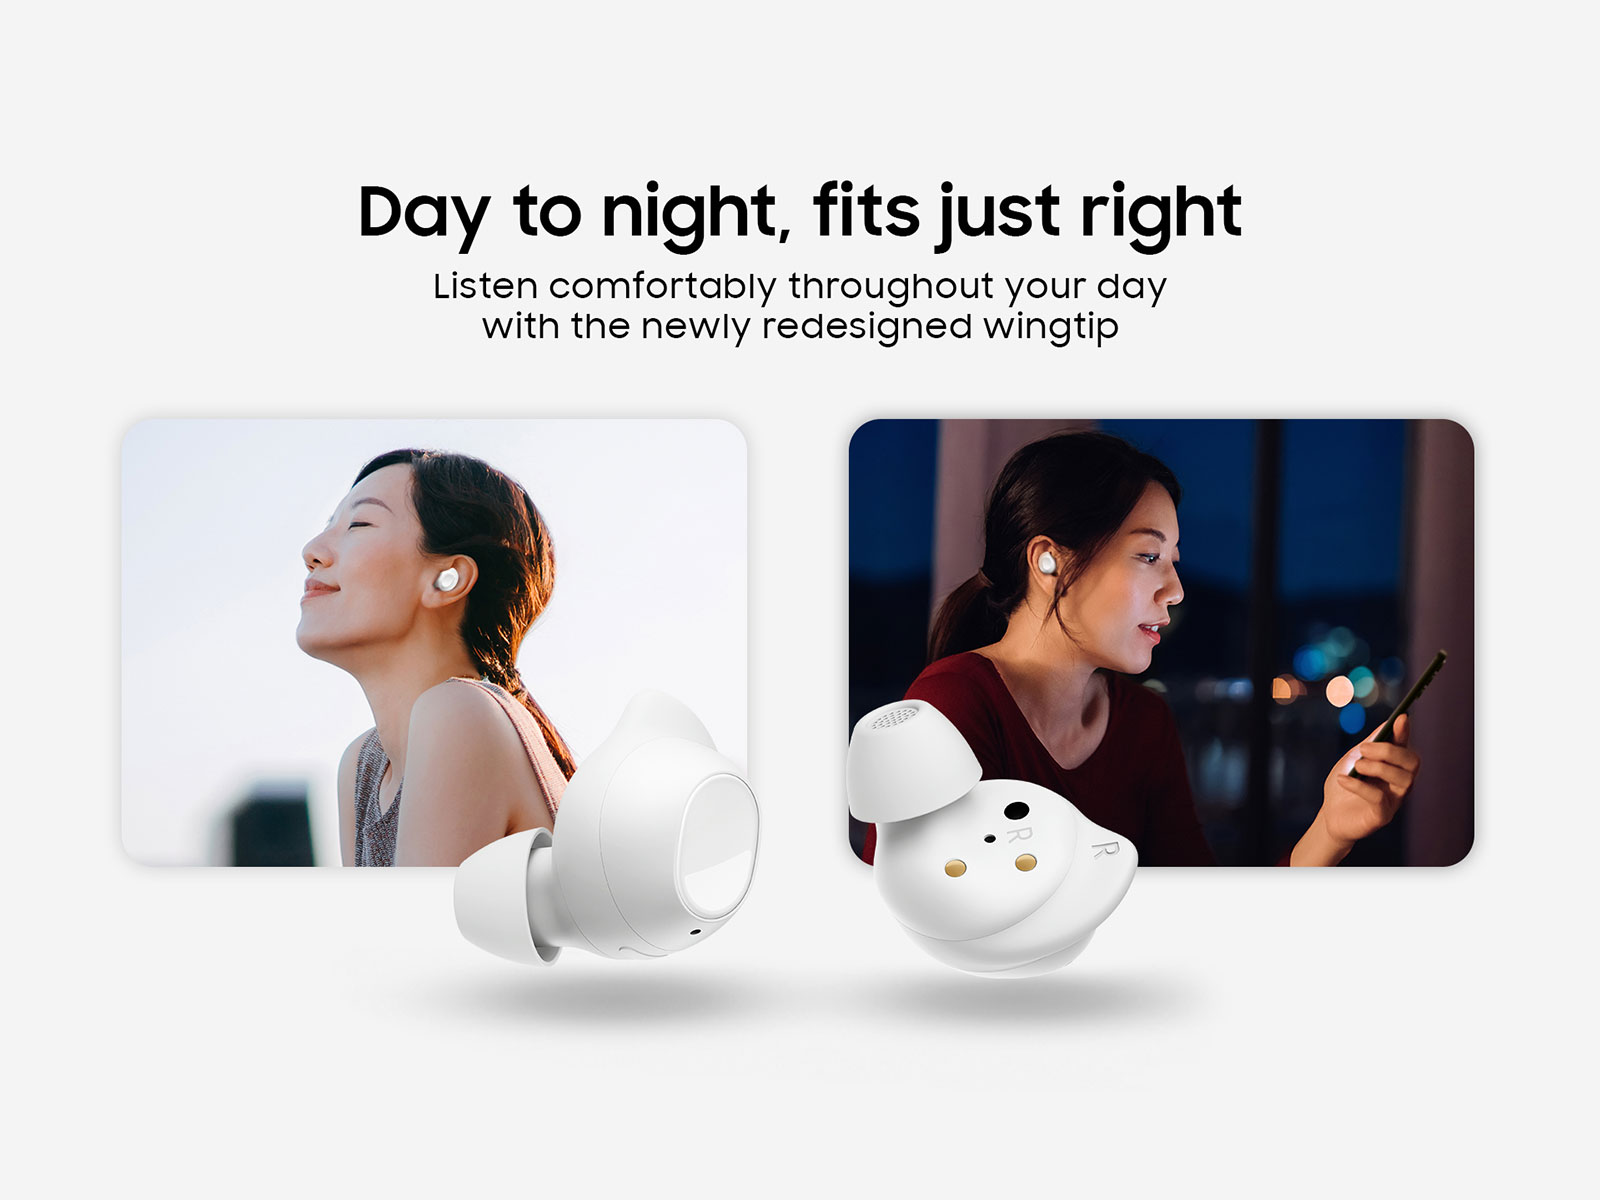 Official Samsung White Galaxy Buds FE True Wireless Earbuds